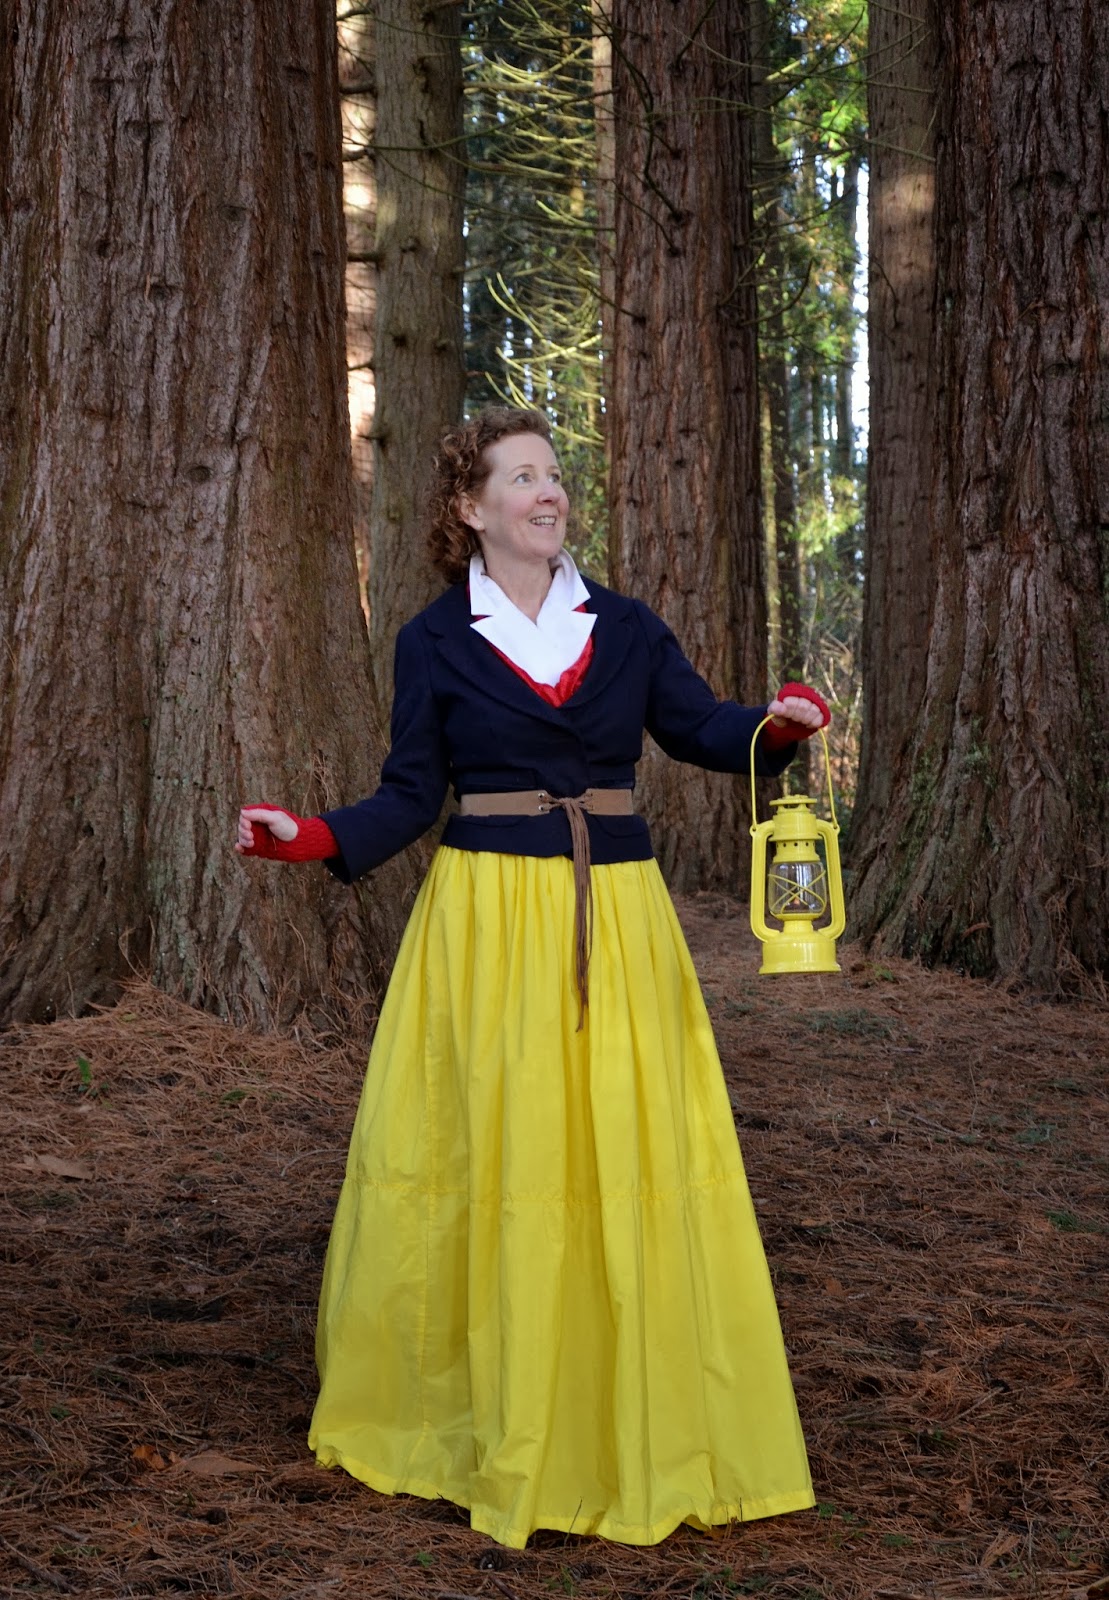 The Travelling Yellow Skirt Freak Show, A Colourful Canvas